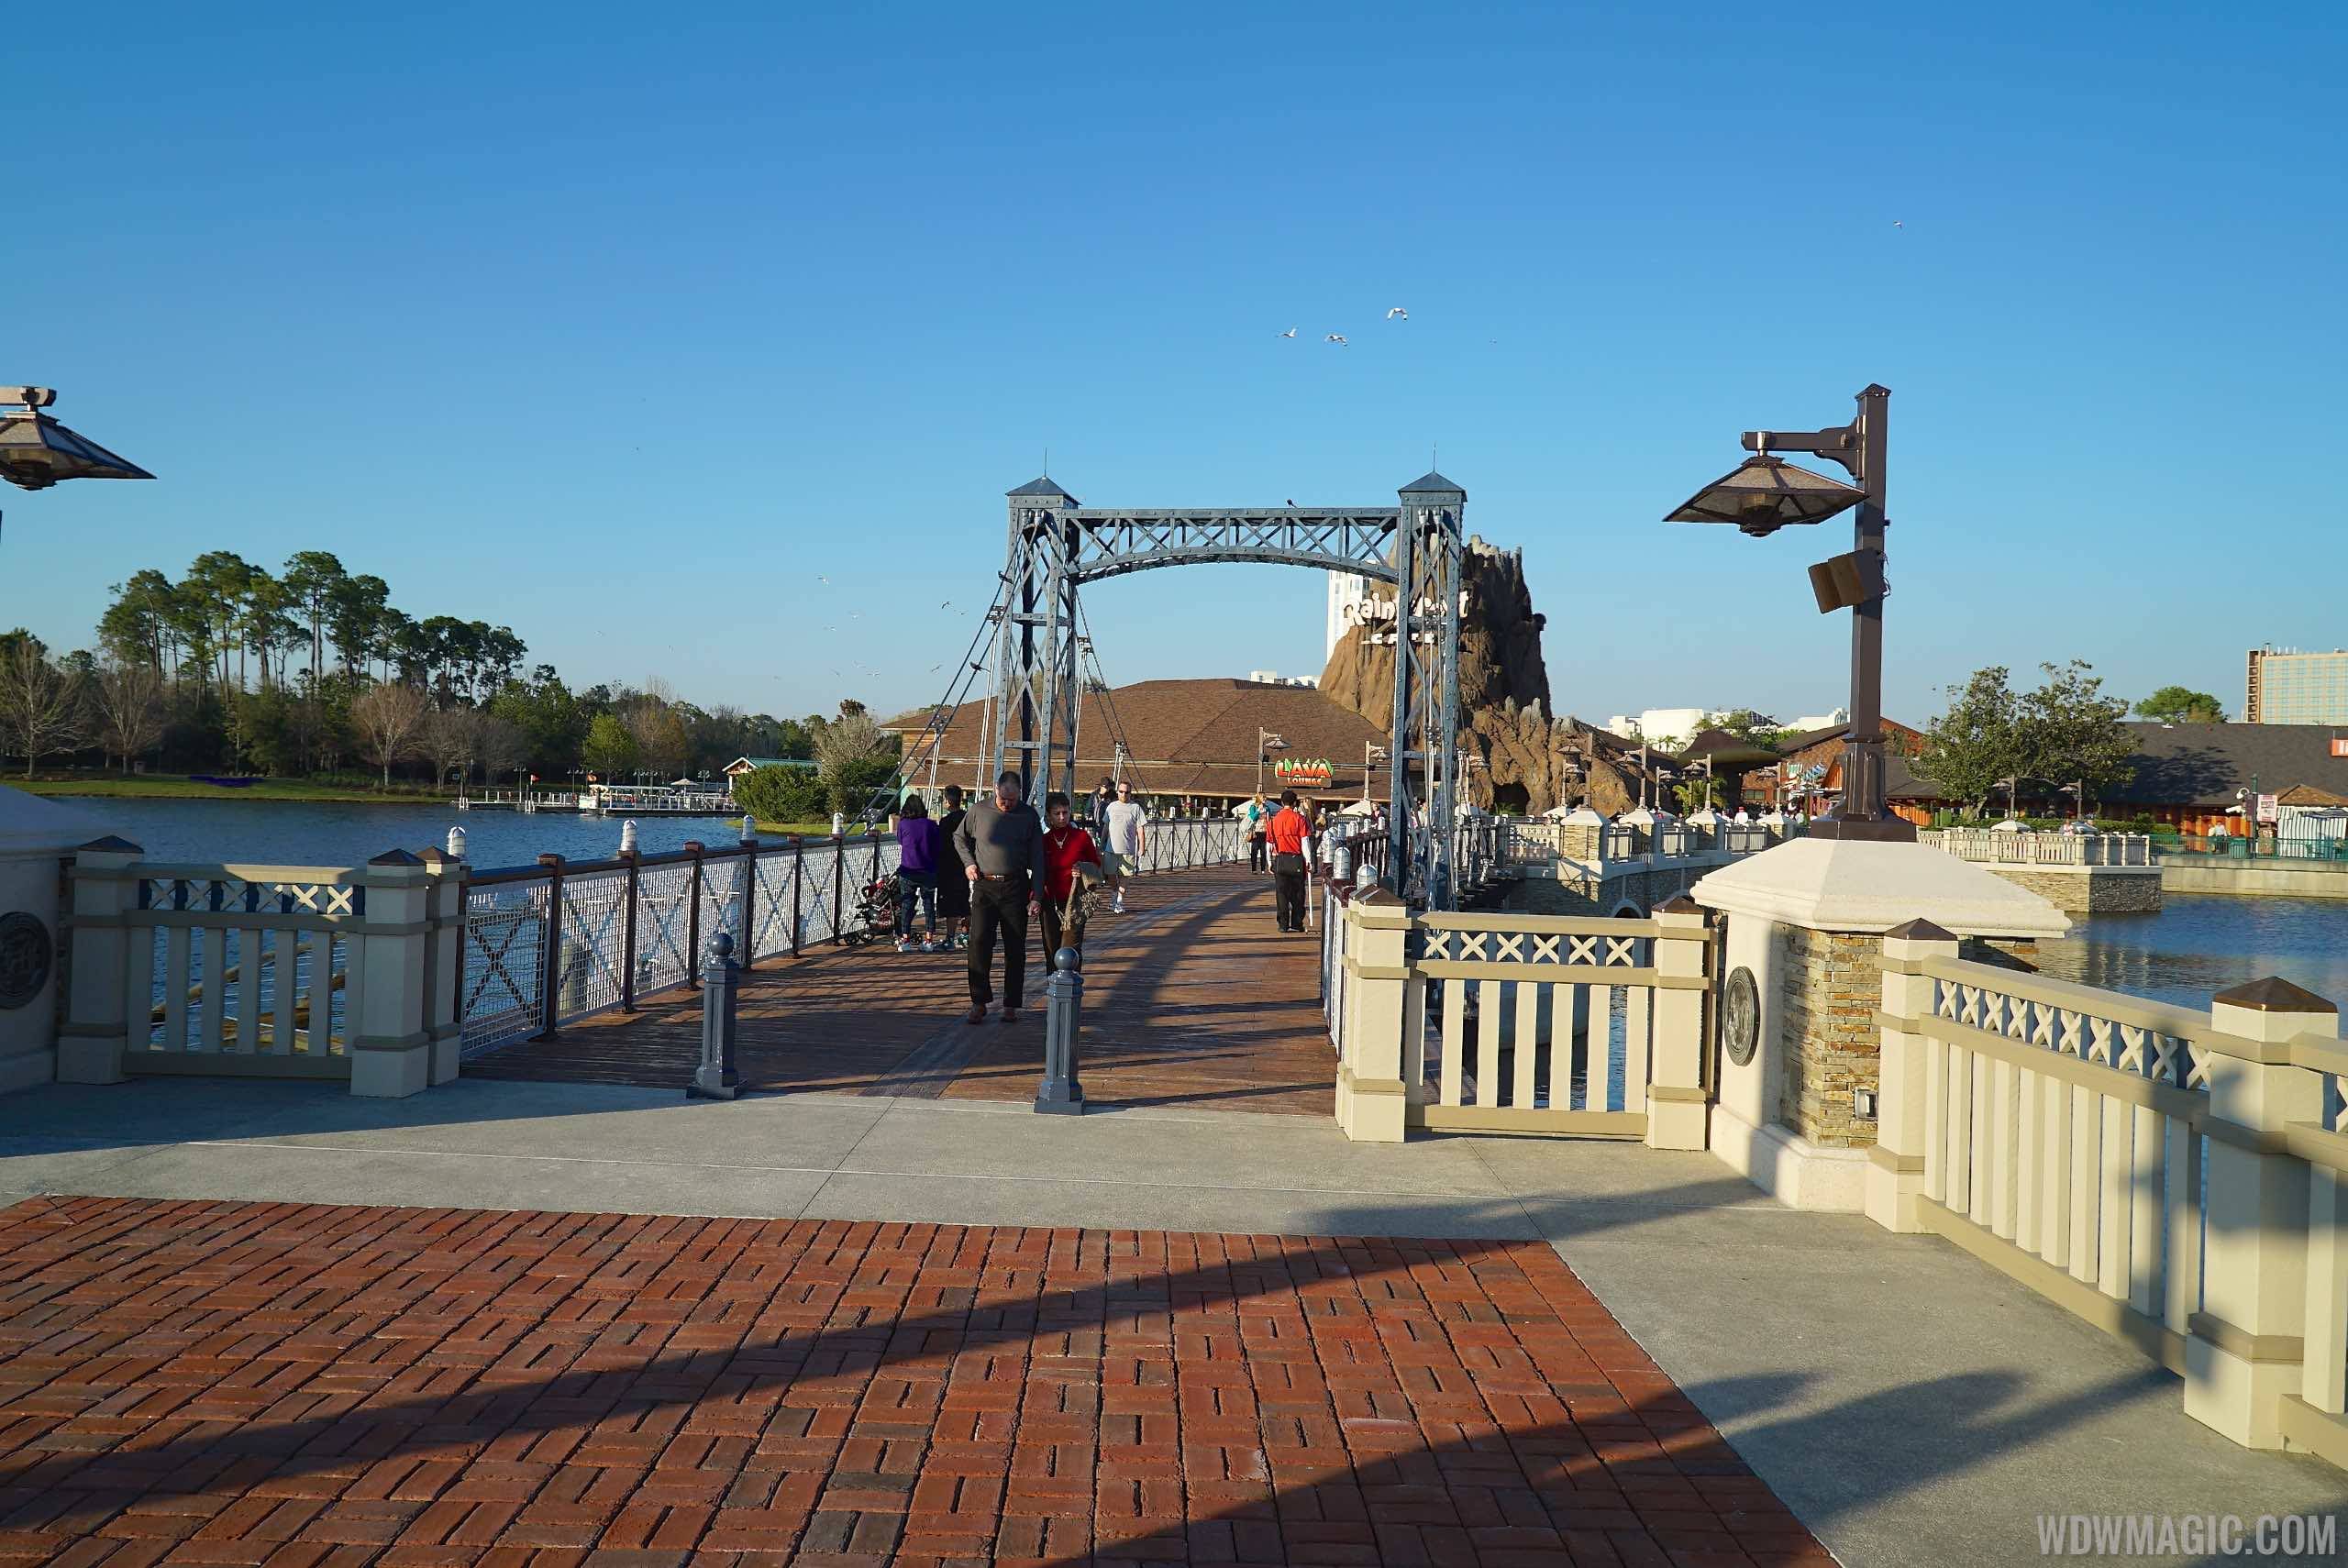 VIDEO - Walk-through of the new Marketplace Causeway at Disney Springs